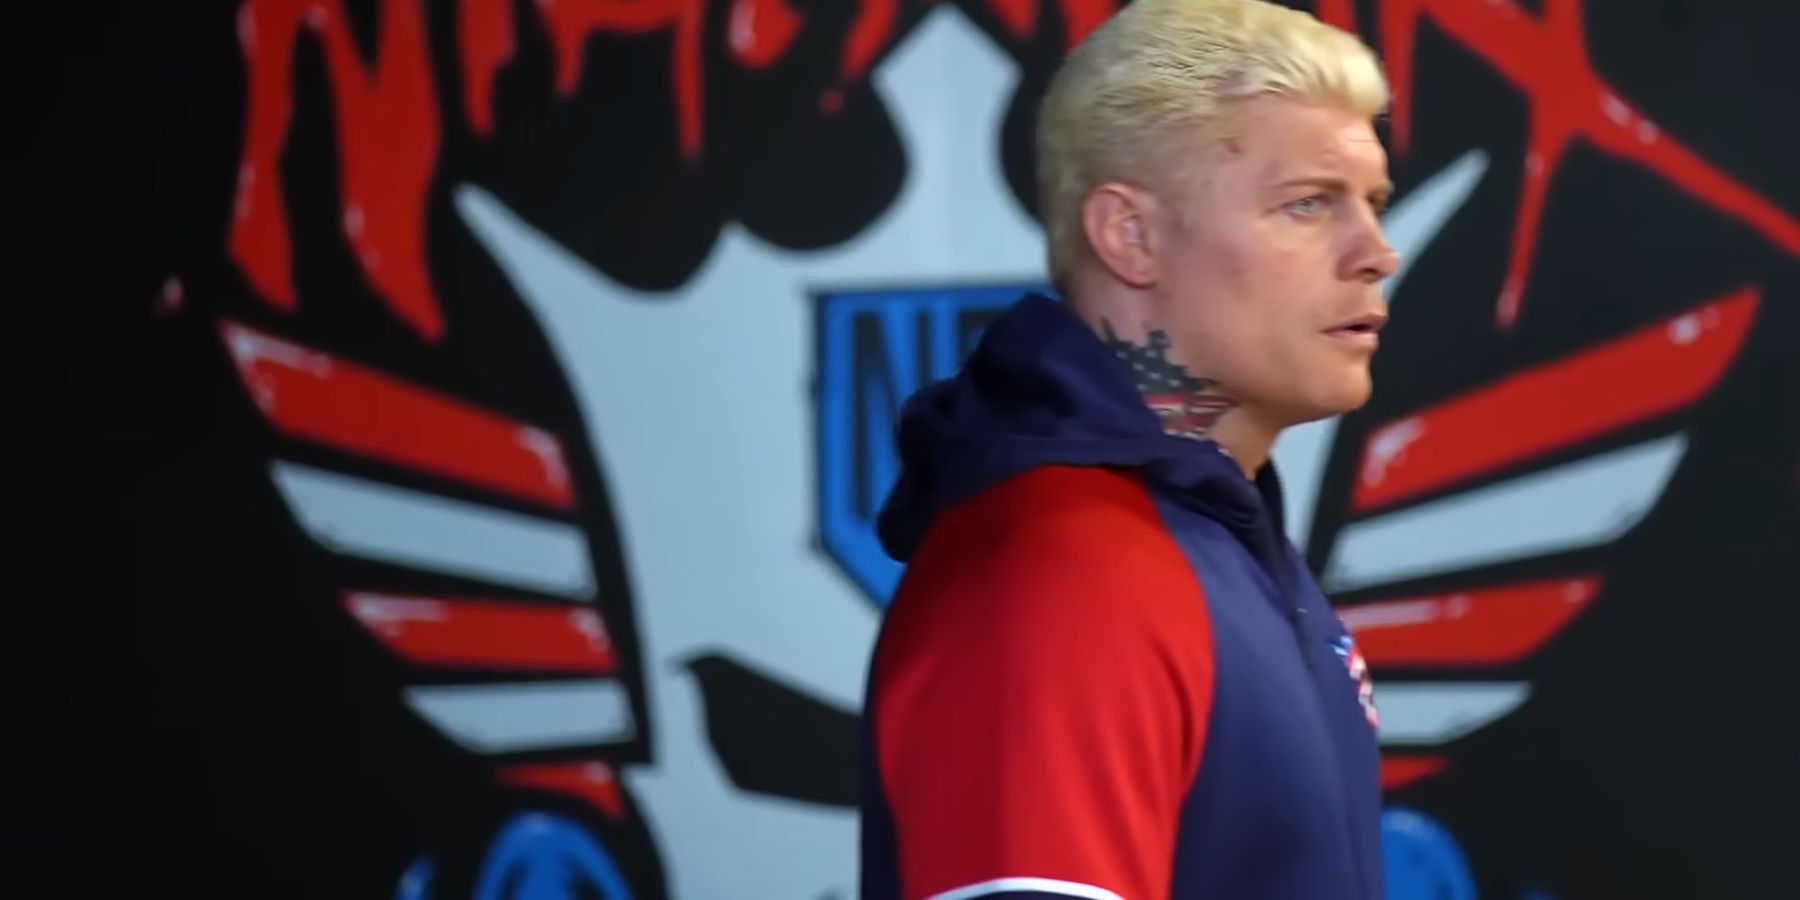  Cody Rhodes enters The Nightmare Factory to prepare for his WWE return at The Royal Rumble.